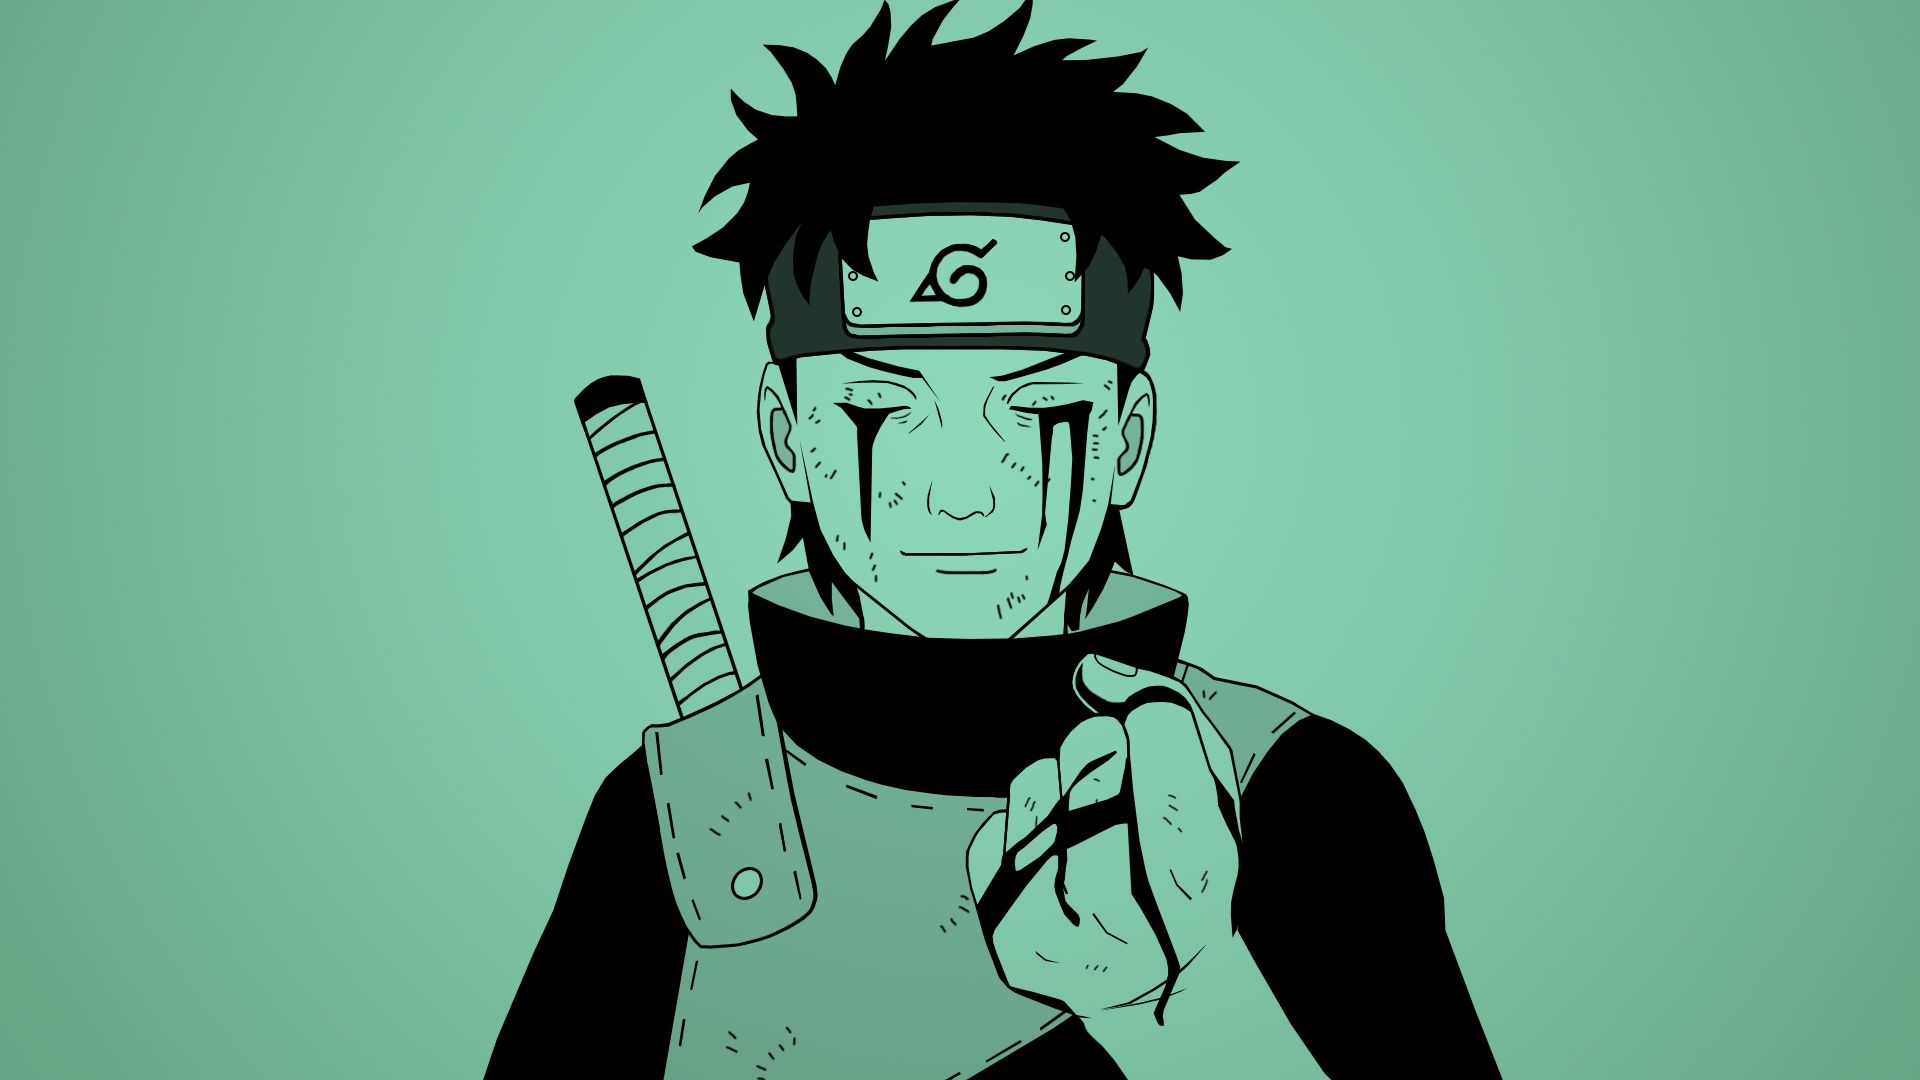 21 Shisui Uchiha Wallpapers for iPhone and Android by Sarah Reed